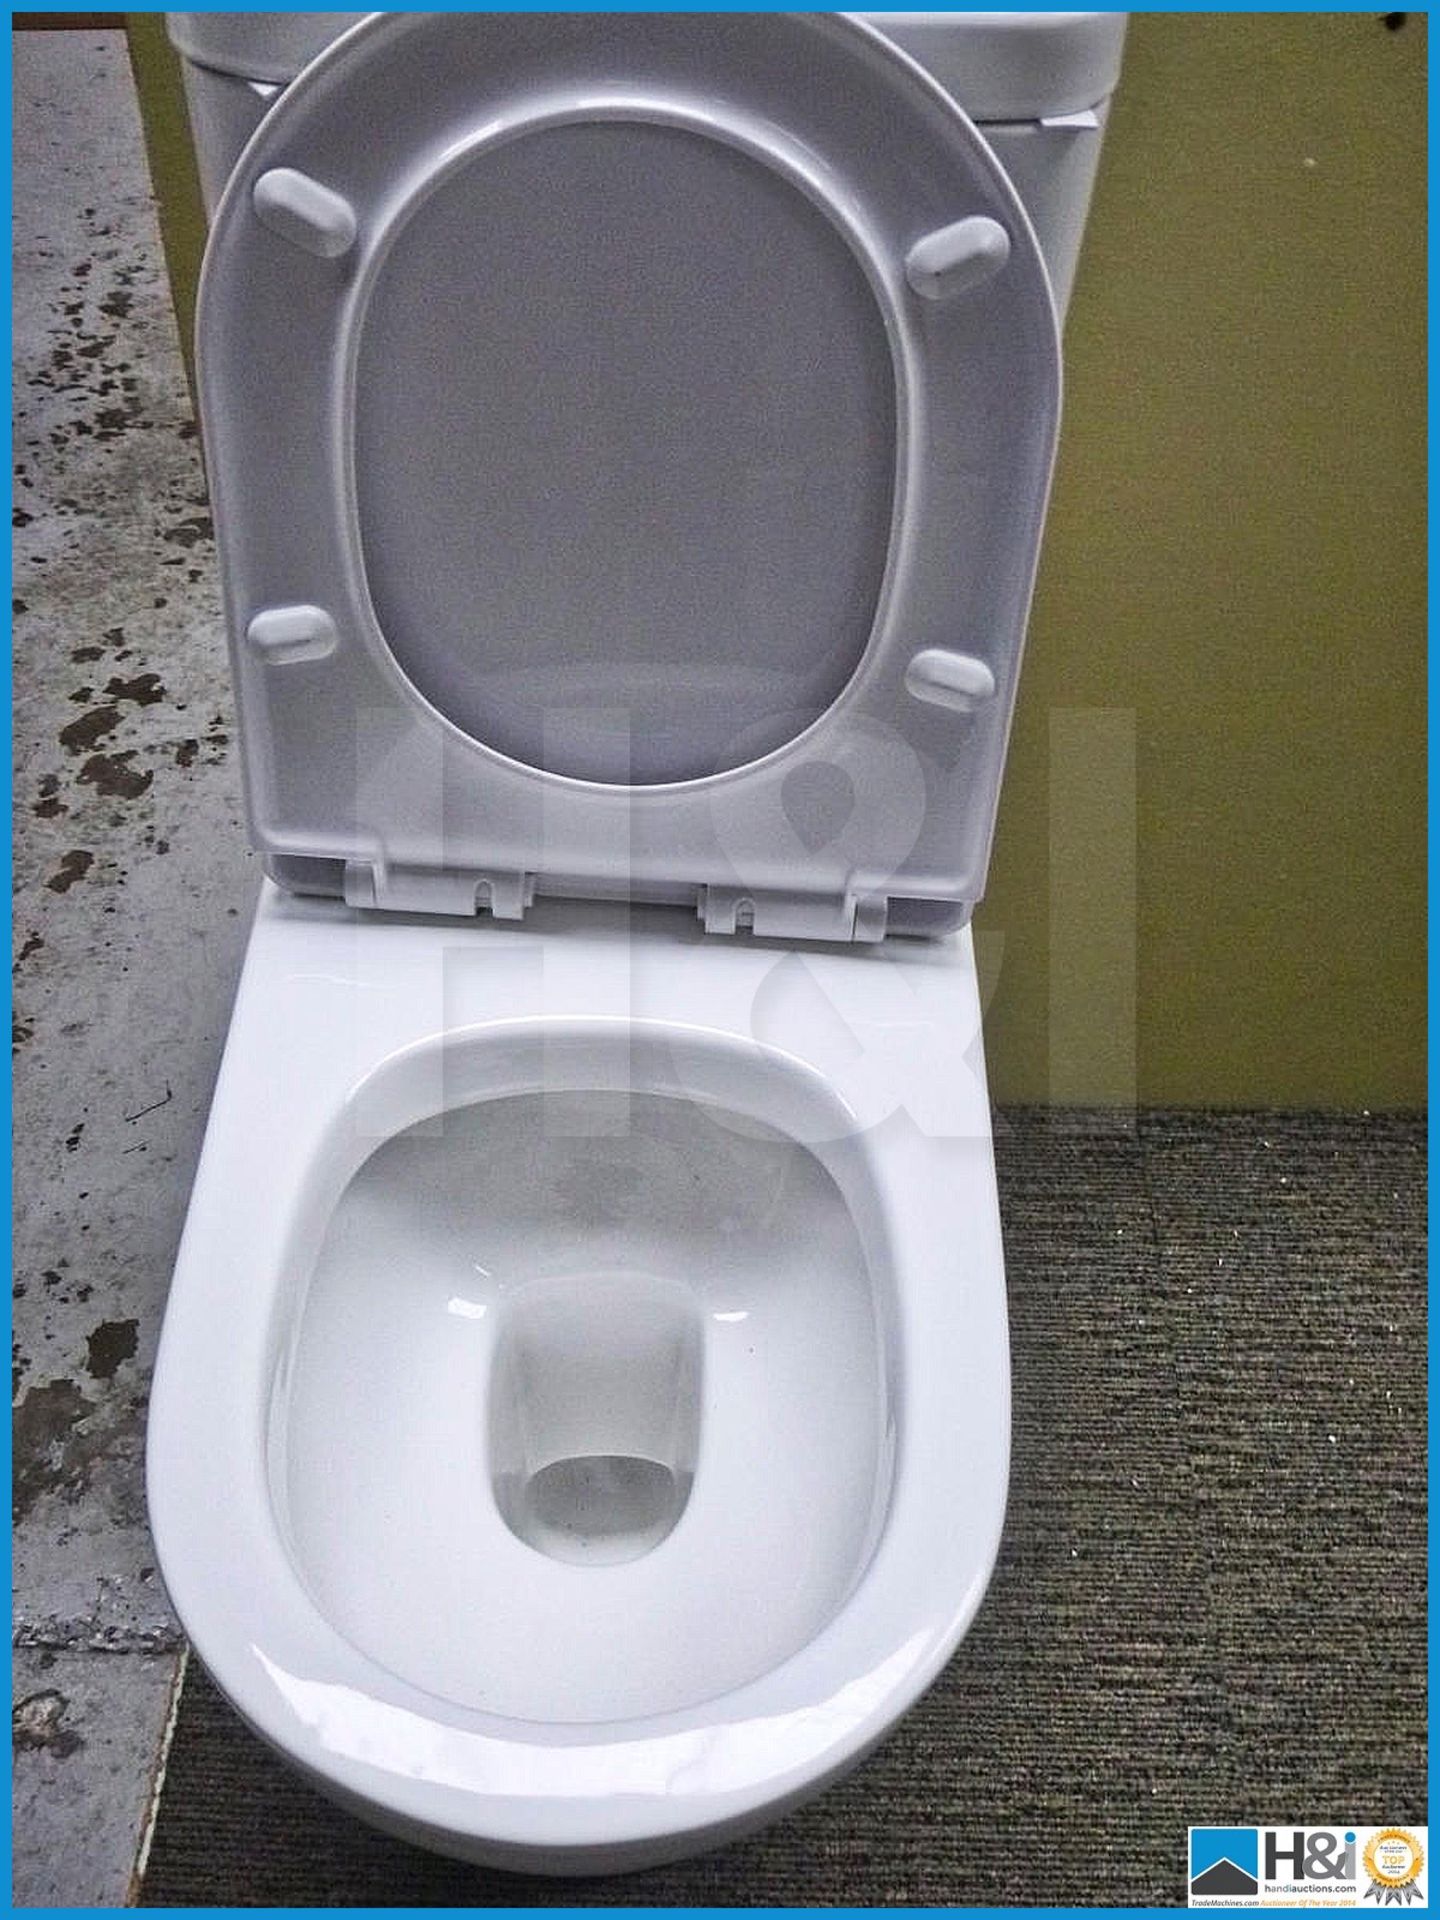 Modern K05 full facia WC toilet complete with sandwich soft close seat. RRP £599. - Image 2 of 3